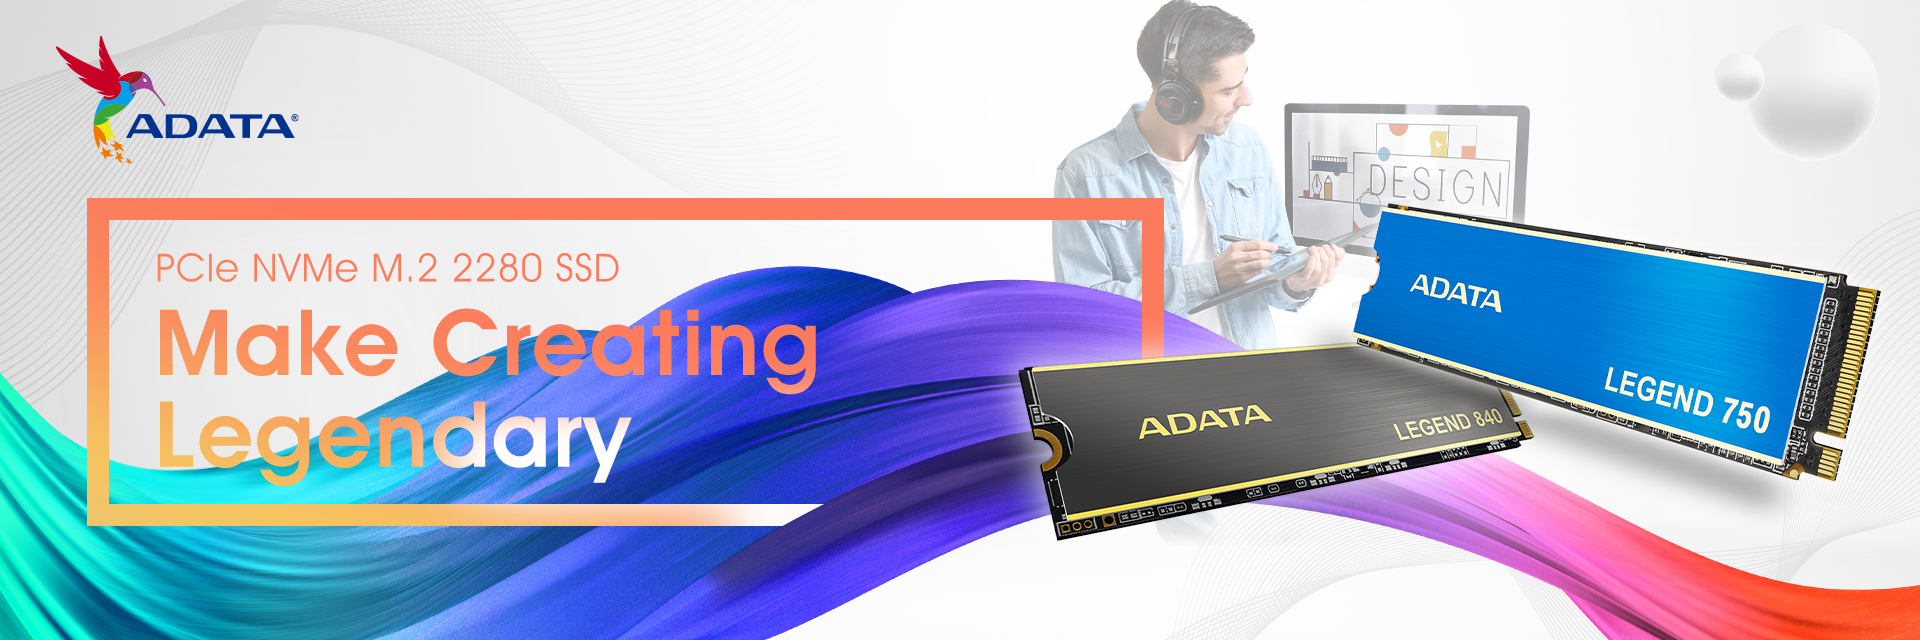 ADATA PREMIUM SSD FOR PS5 1TB PCIe Gen4 x4 M.2 2280 Internal Solid State  Drive, White SSD, Ideal for Gaming, PS5 Compatible - Innogrit IG5236